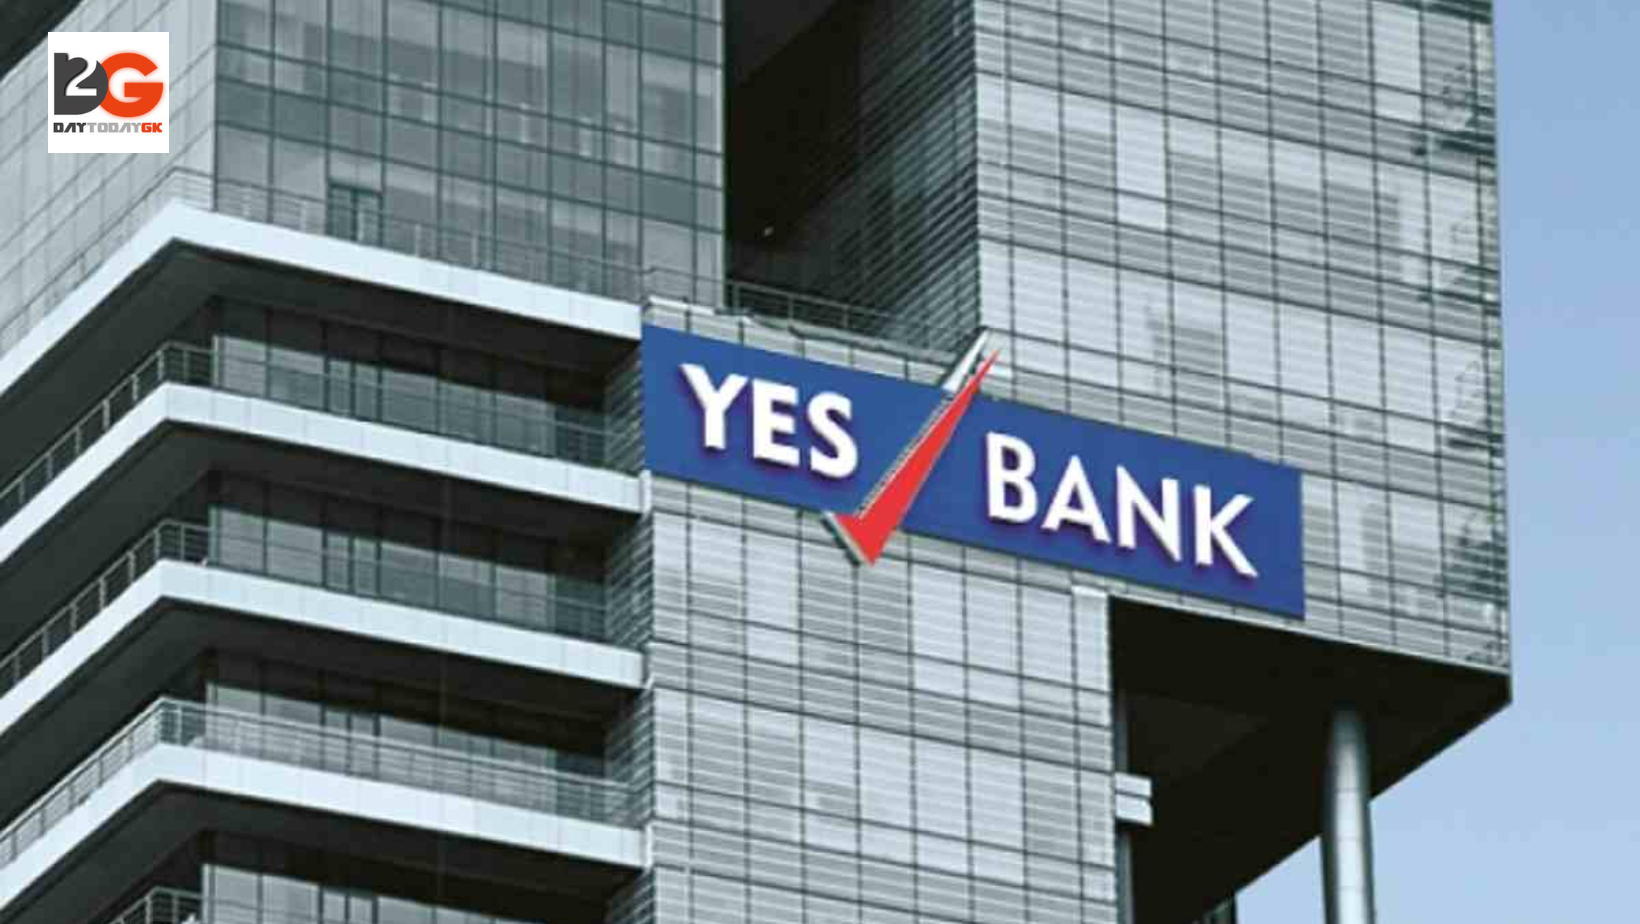 YES BANK Achieves Milestone as First Indian Bank on RXIL’s ITFS Platform